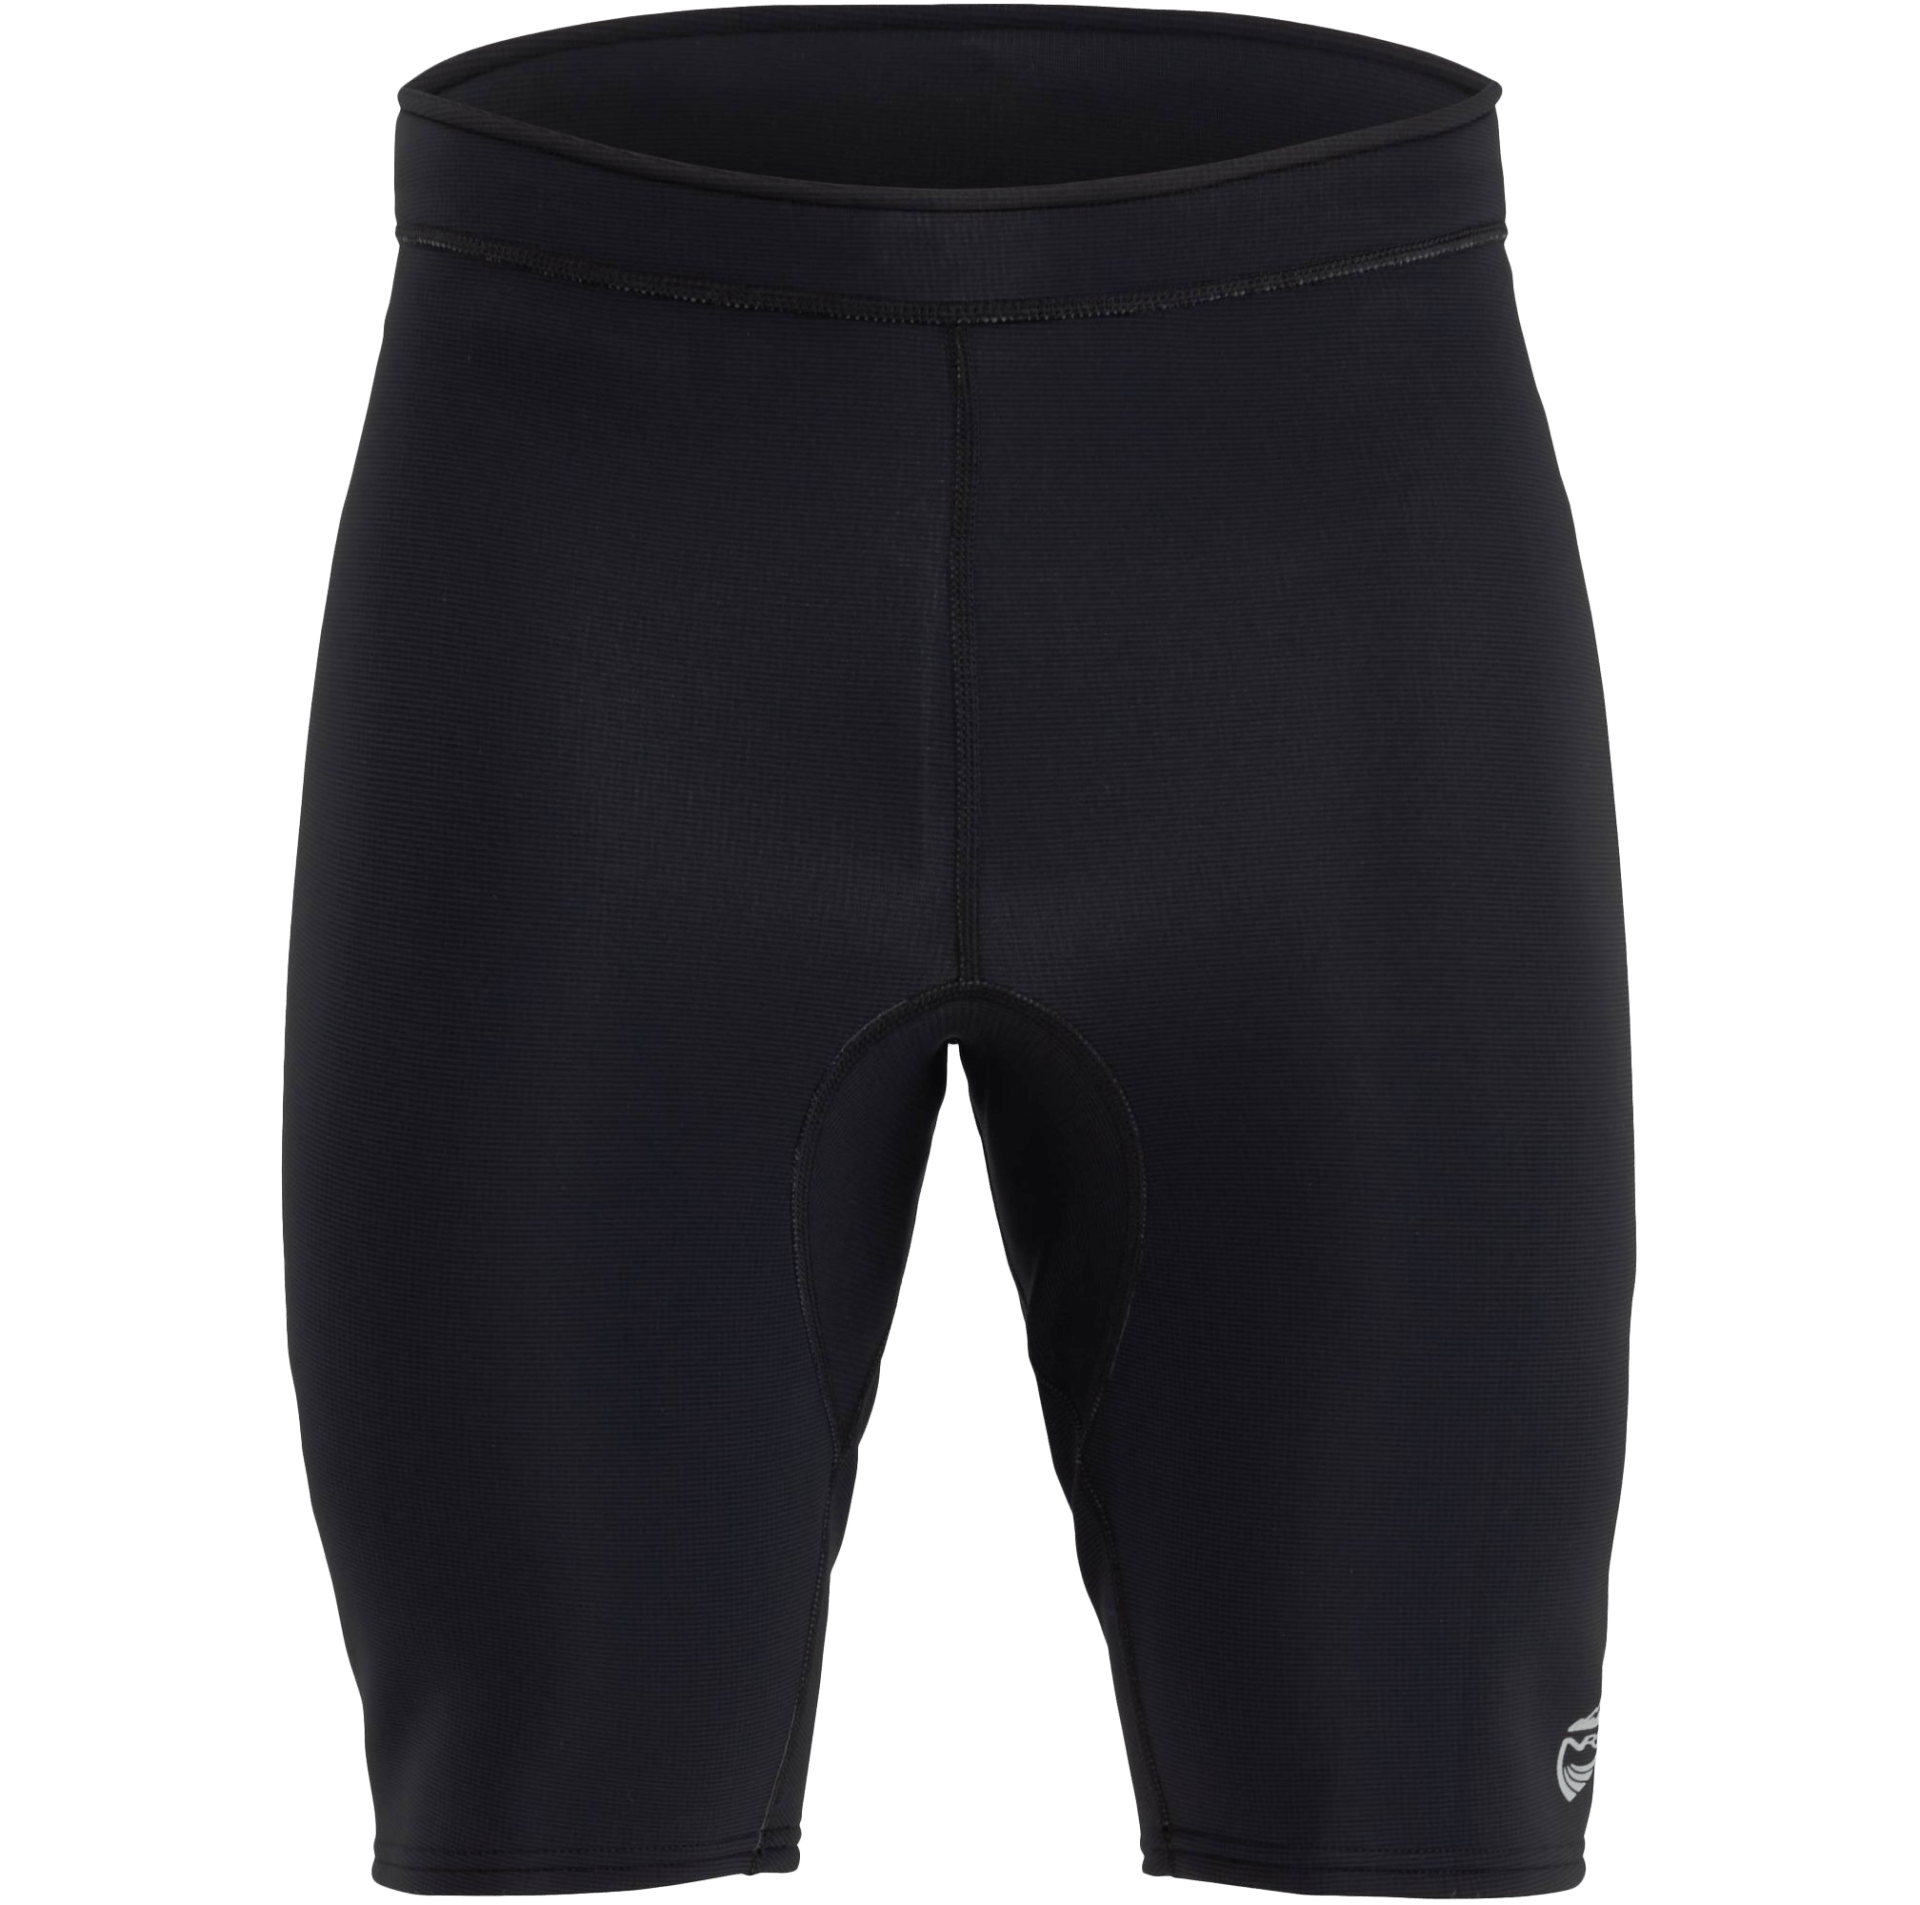 nrs_mens_hydroskin_05mm_short_front.png